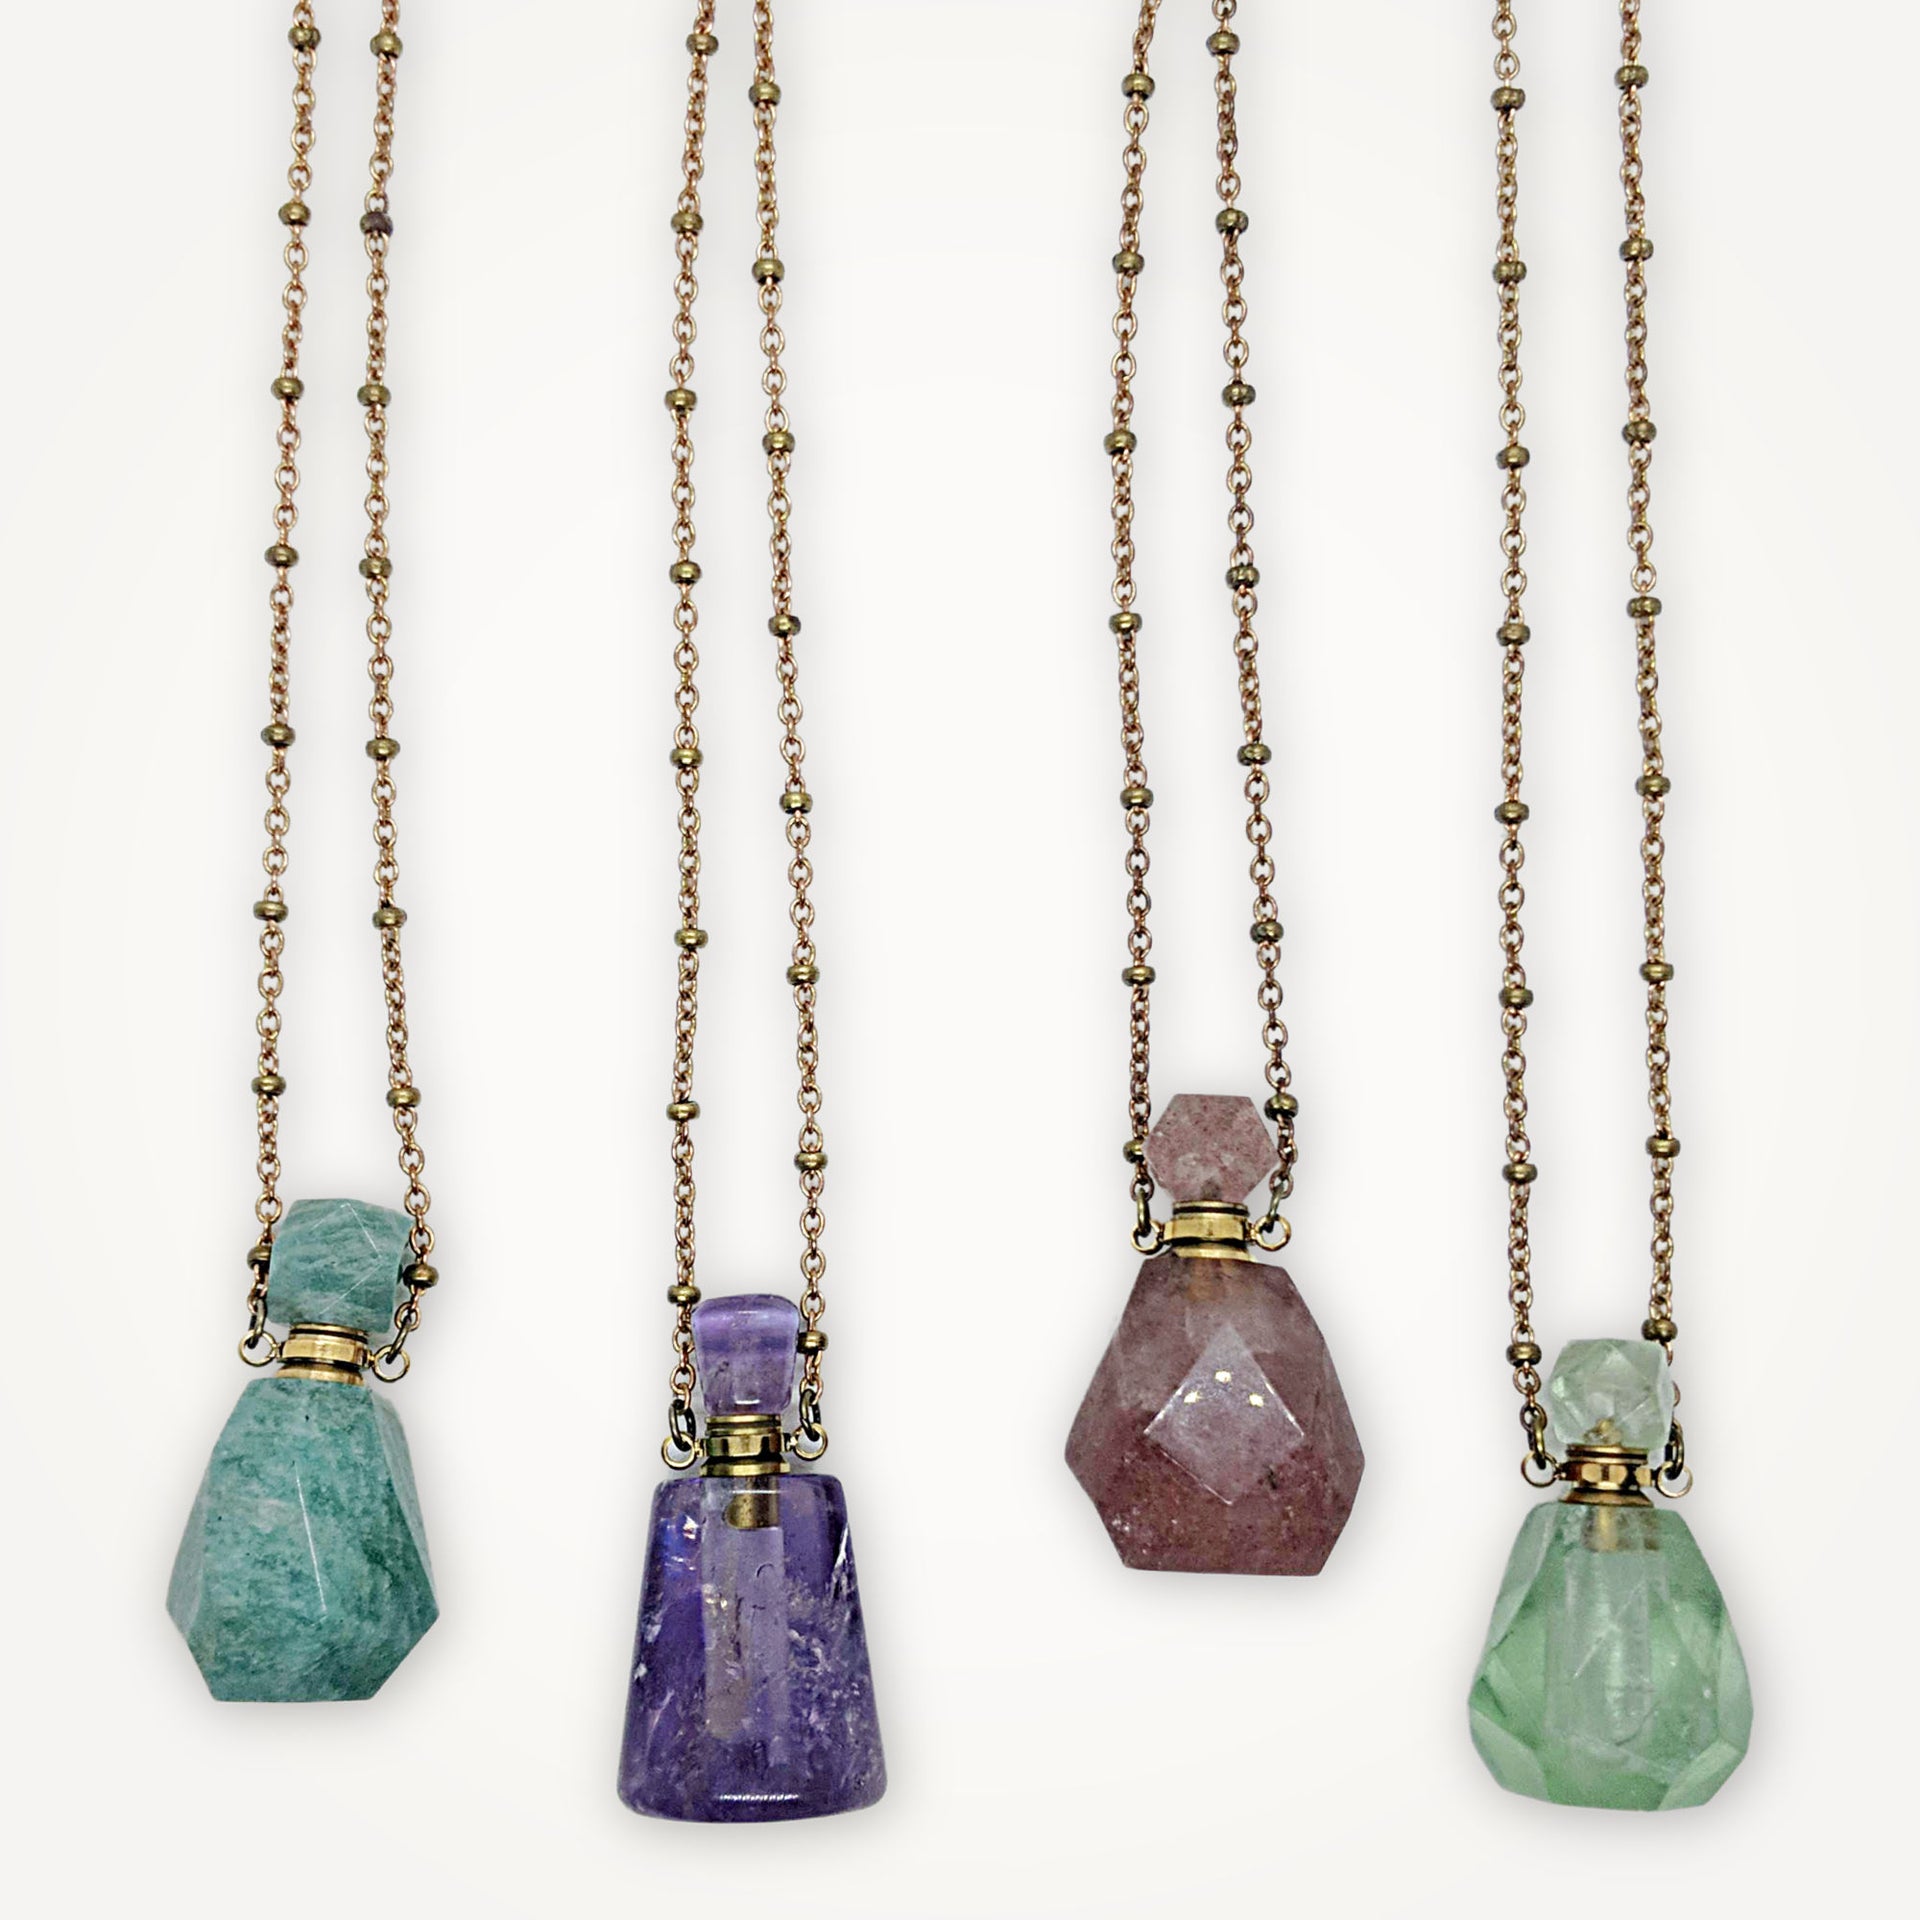 Gemstone Vial Perfume Necklace | Beatrixbell Handcrafted Jewelry ...